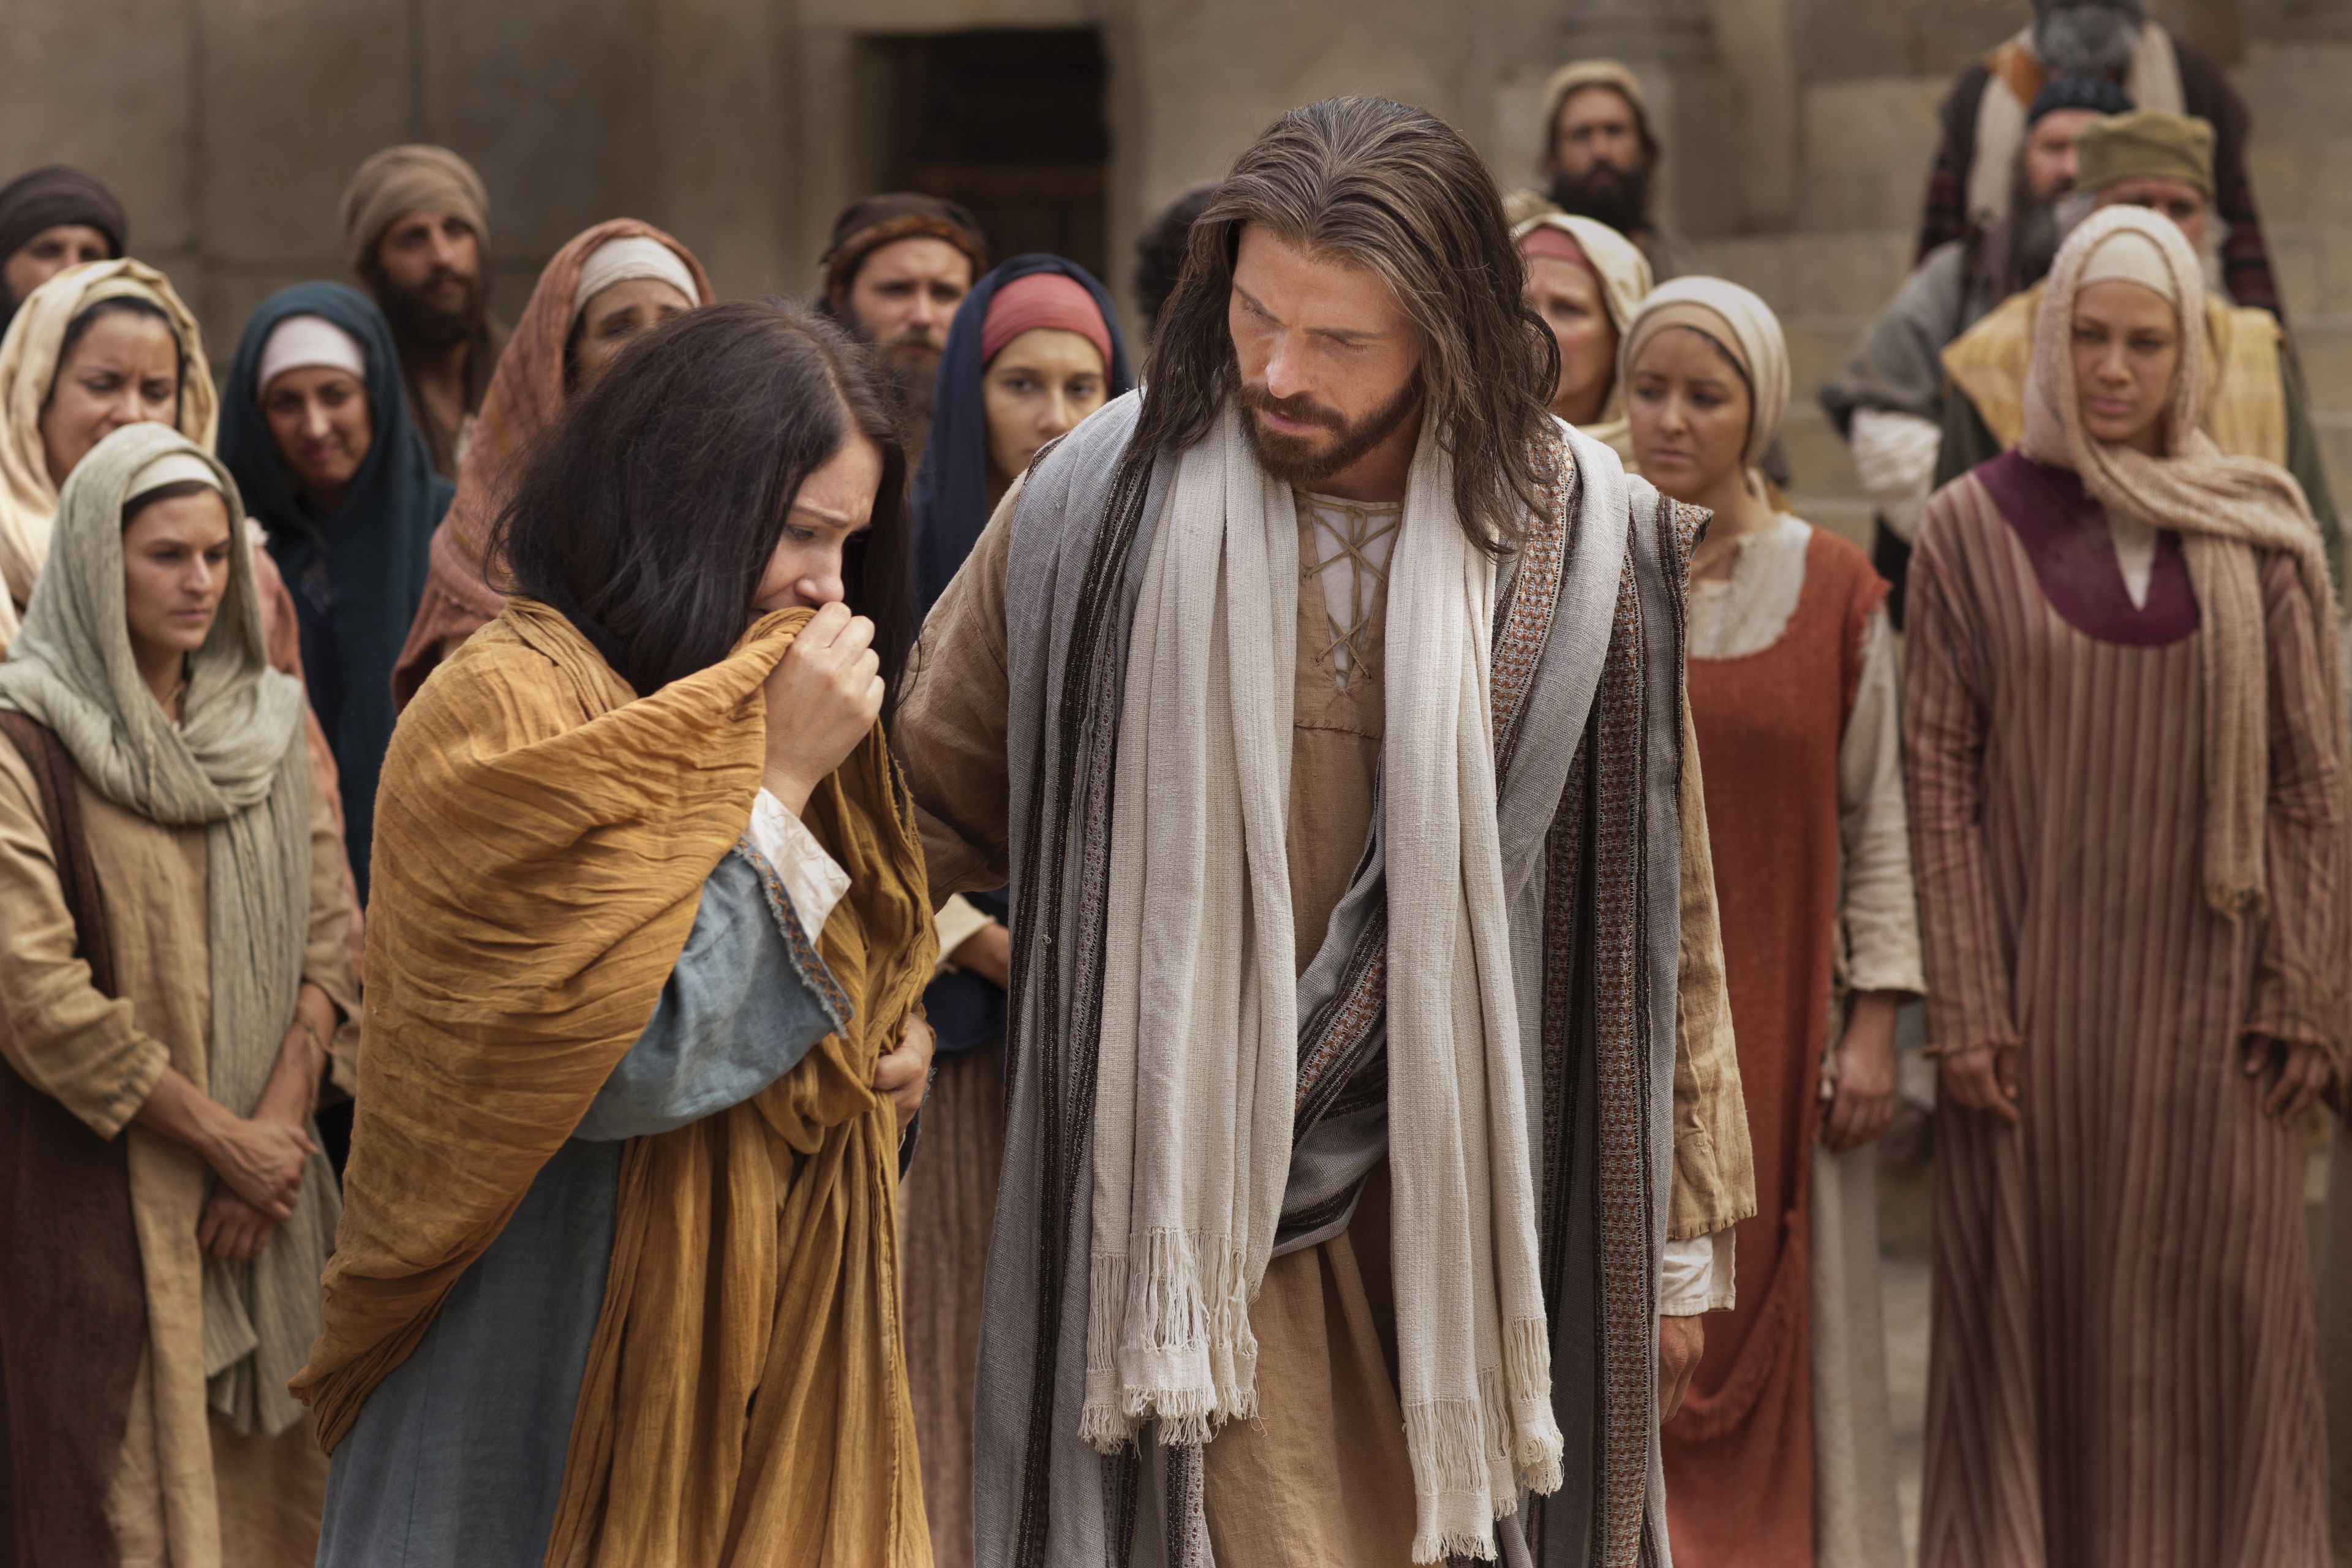 Jesus walking and talking with the woman taken in adultery.